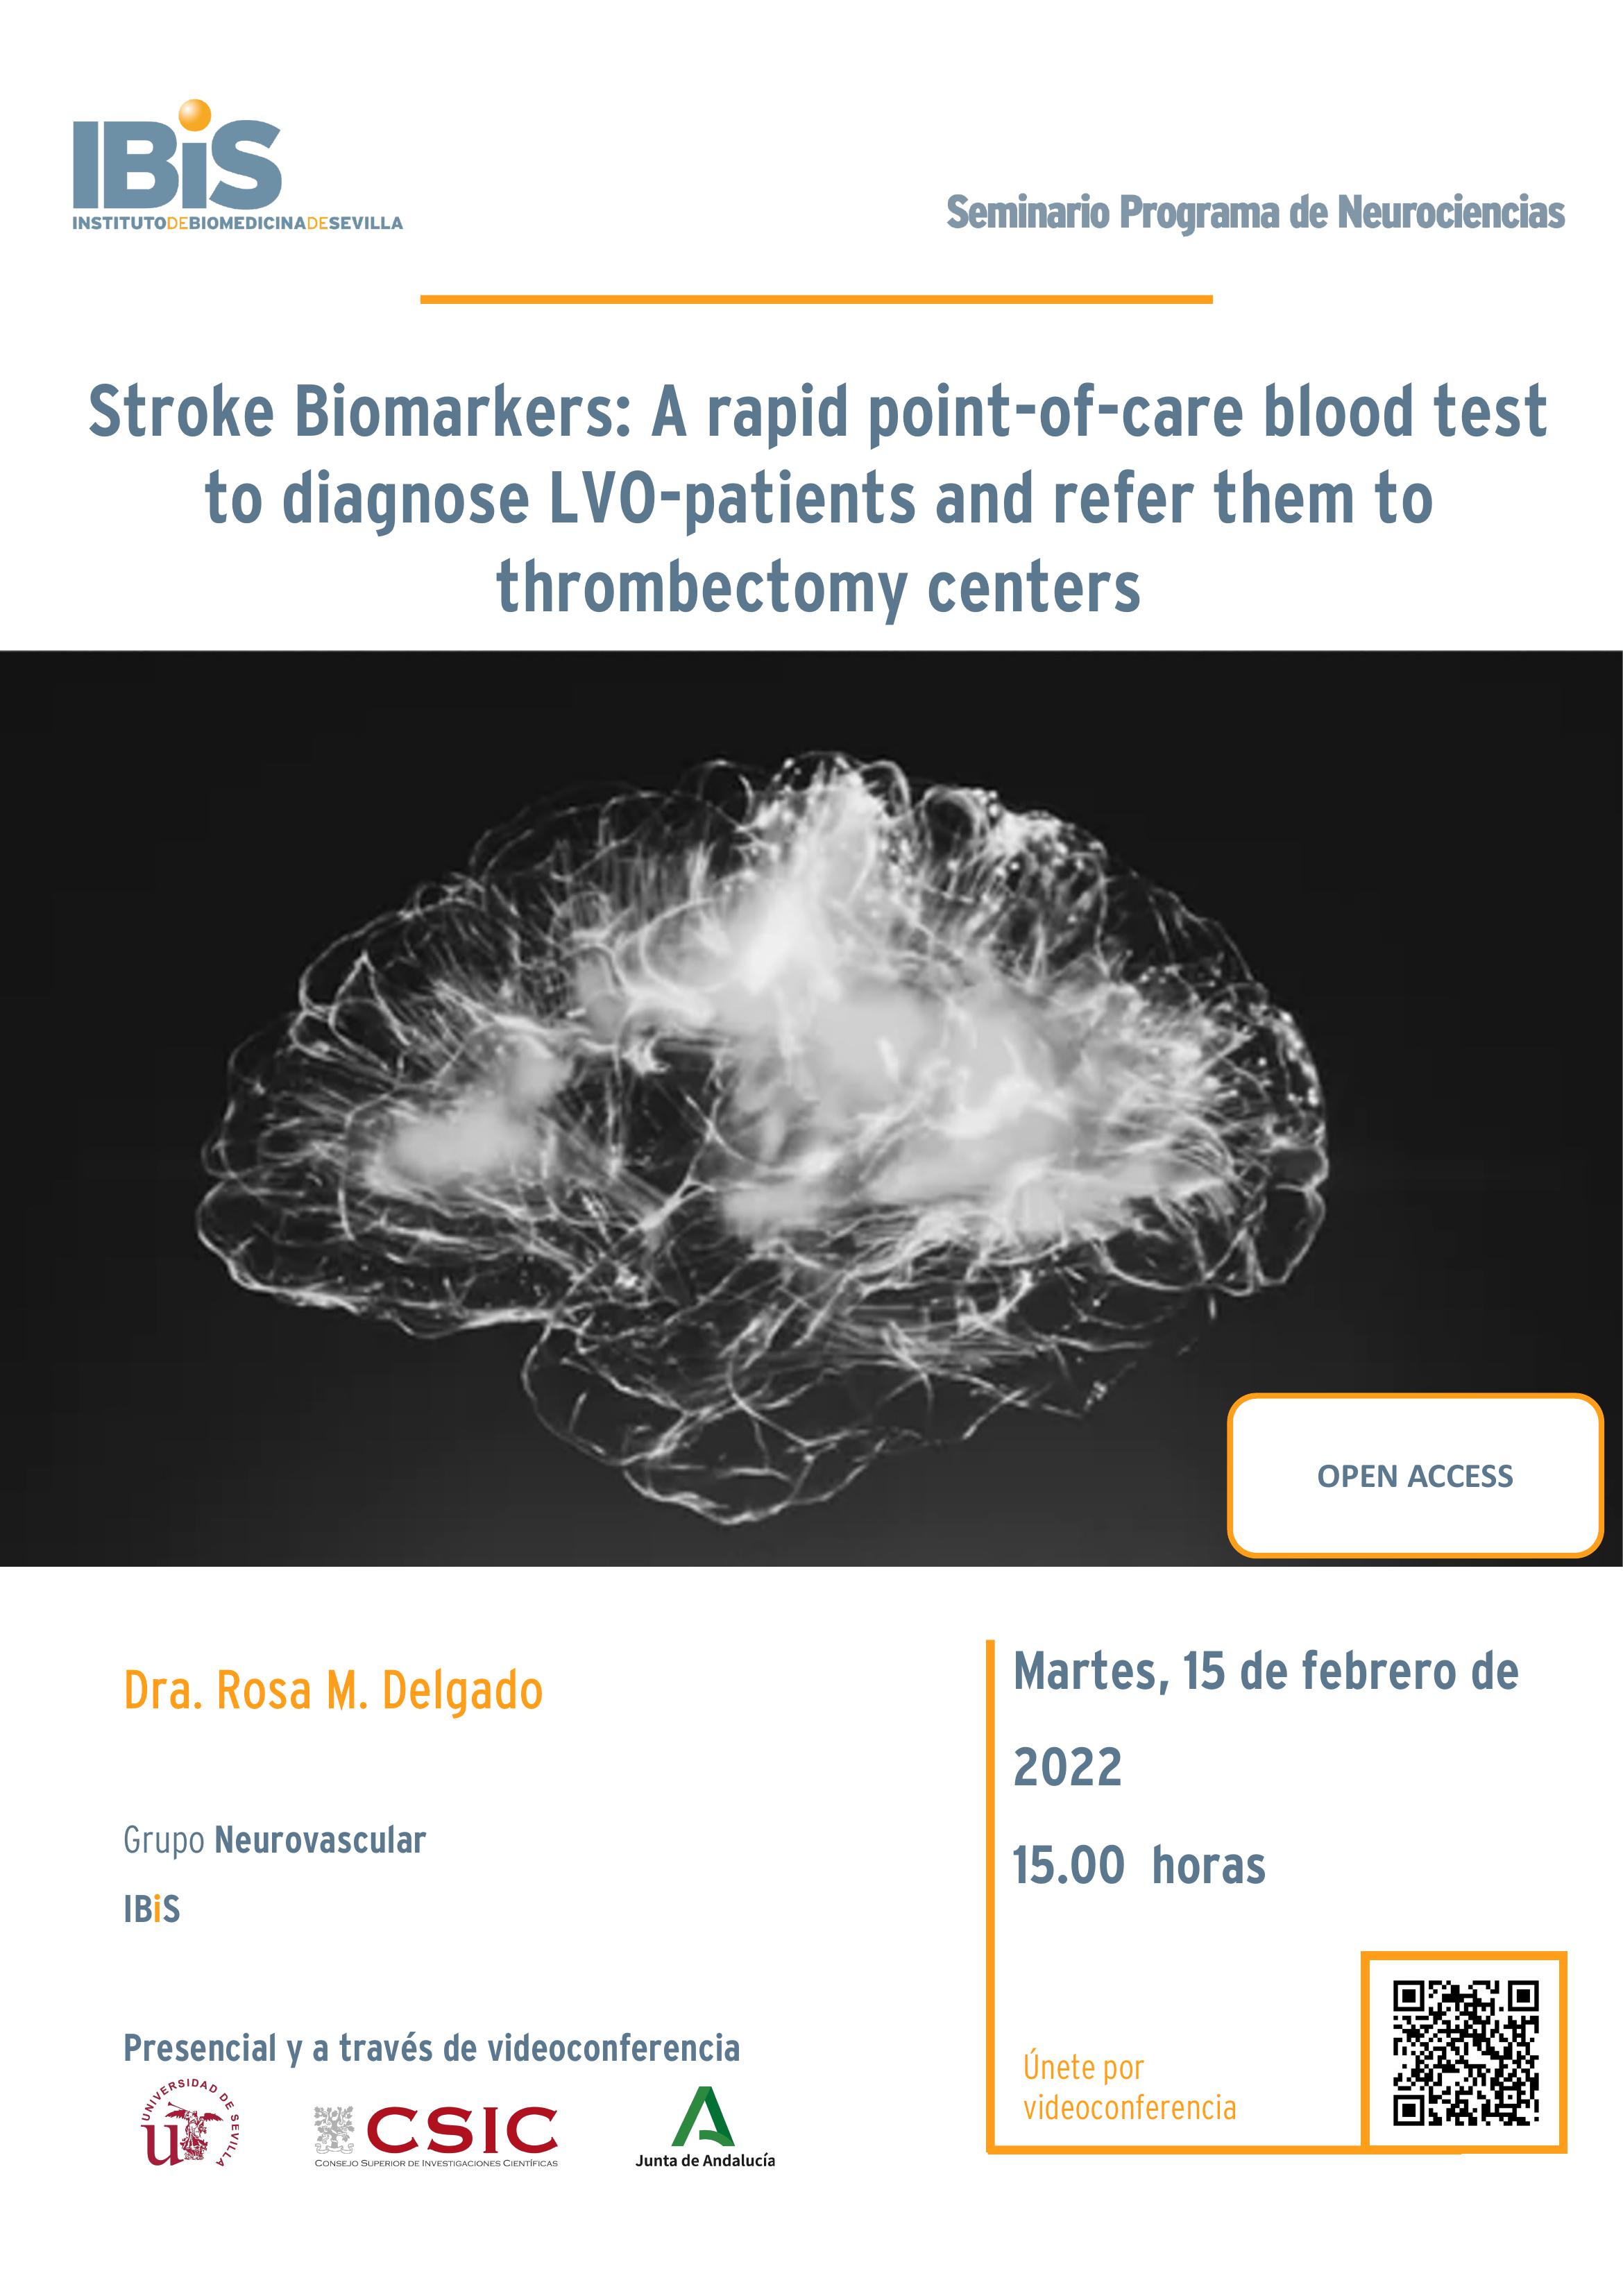 Poster: Stroke Biomarkers: A rapid point-of-care blood test to diagnose LVO-patients and refer them to thrombectomy centers